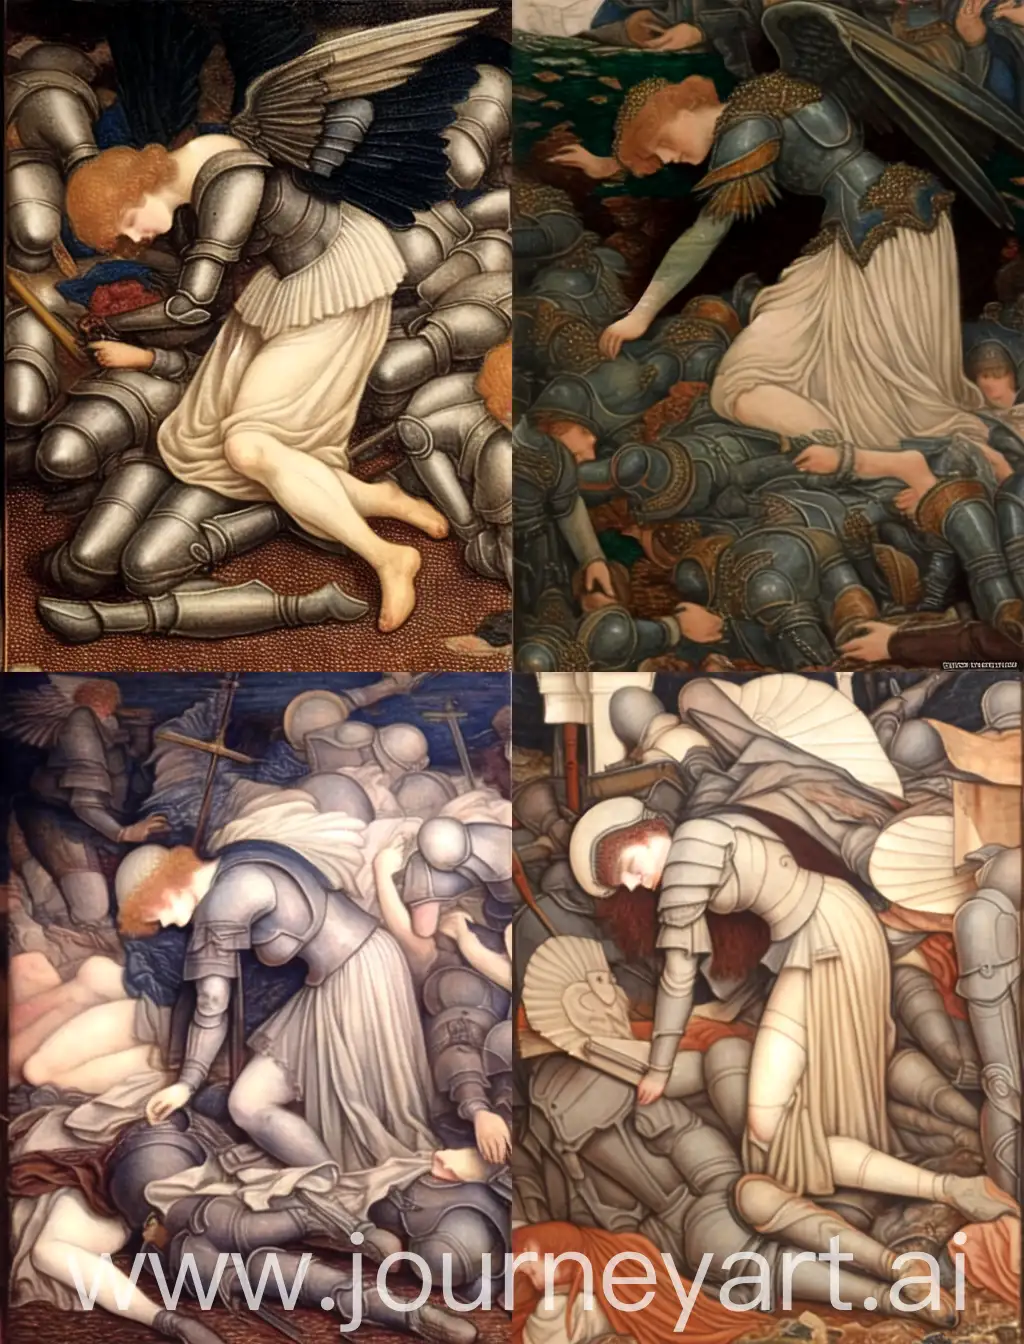 Edward Burne-Jones painting of a defeated female angel soldier kneeling on top of a pile of bodies after a long battle,  high detailed, full body —c 22 —s 750 —v 6.0 —ar 5:7